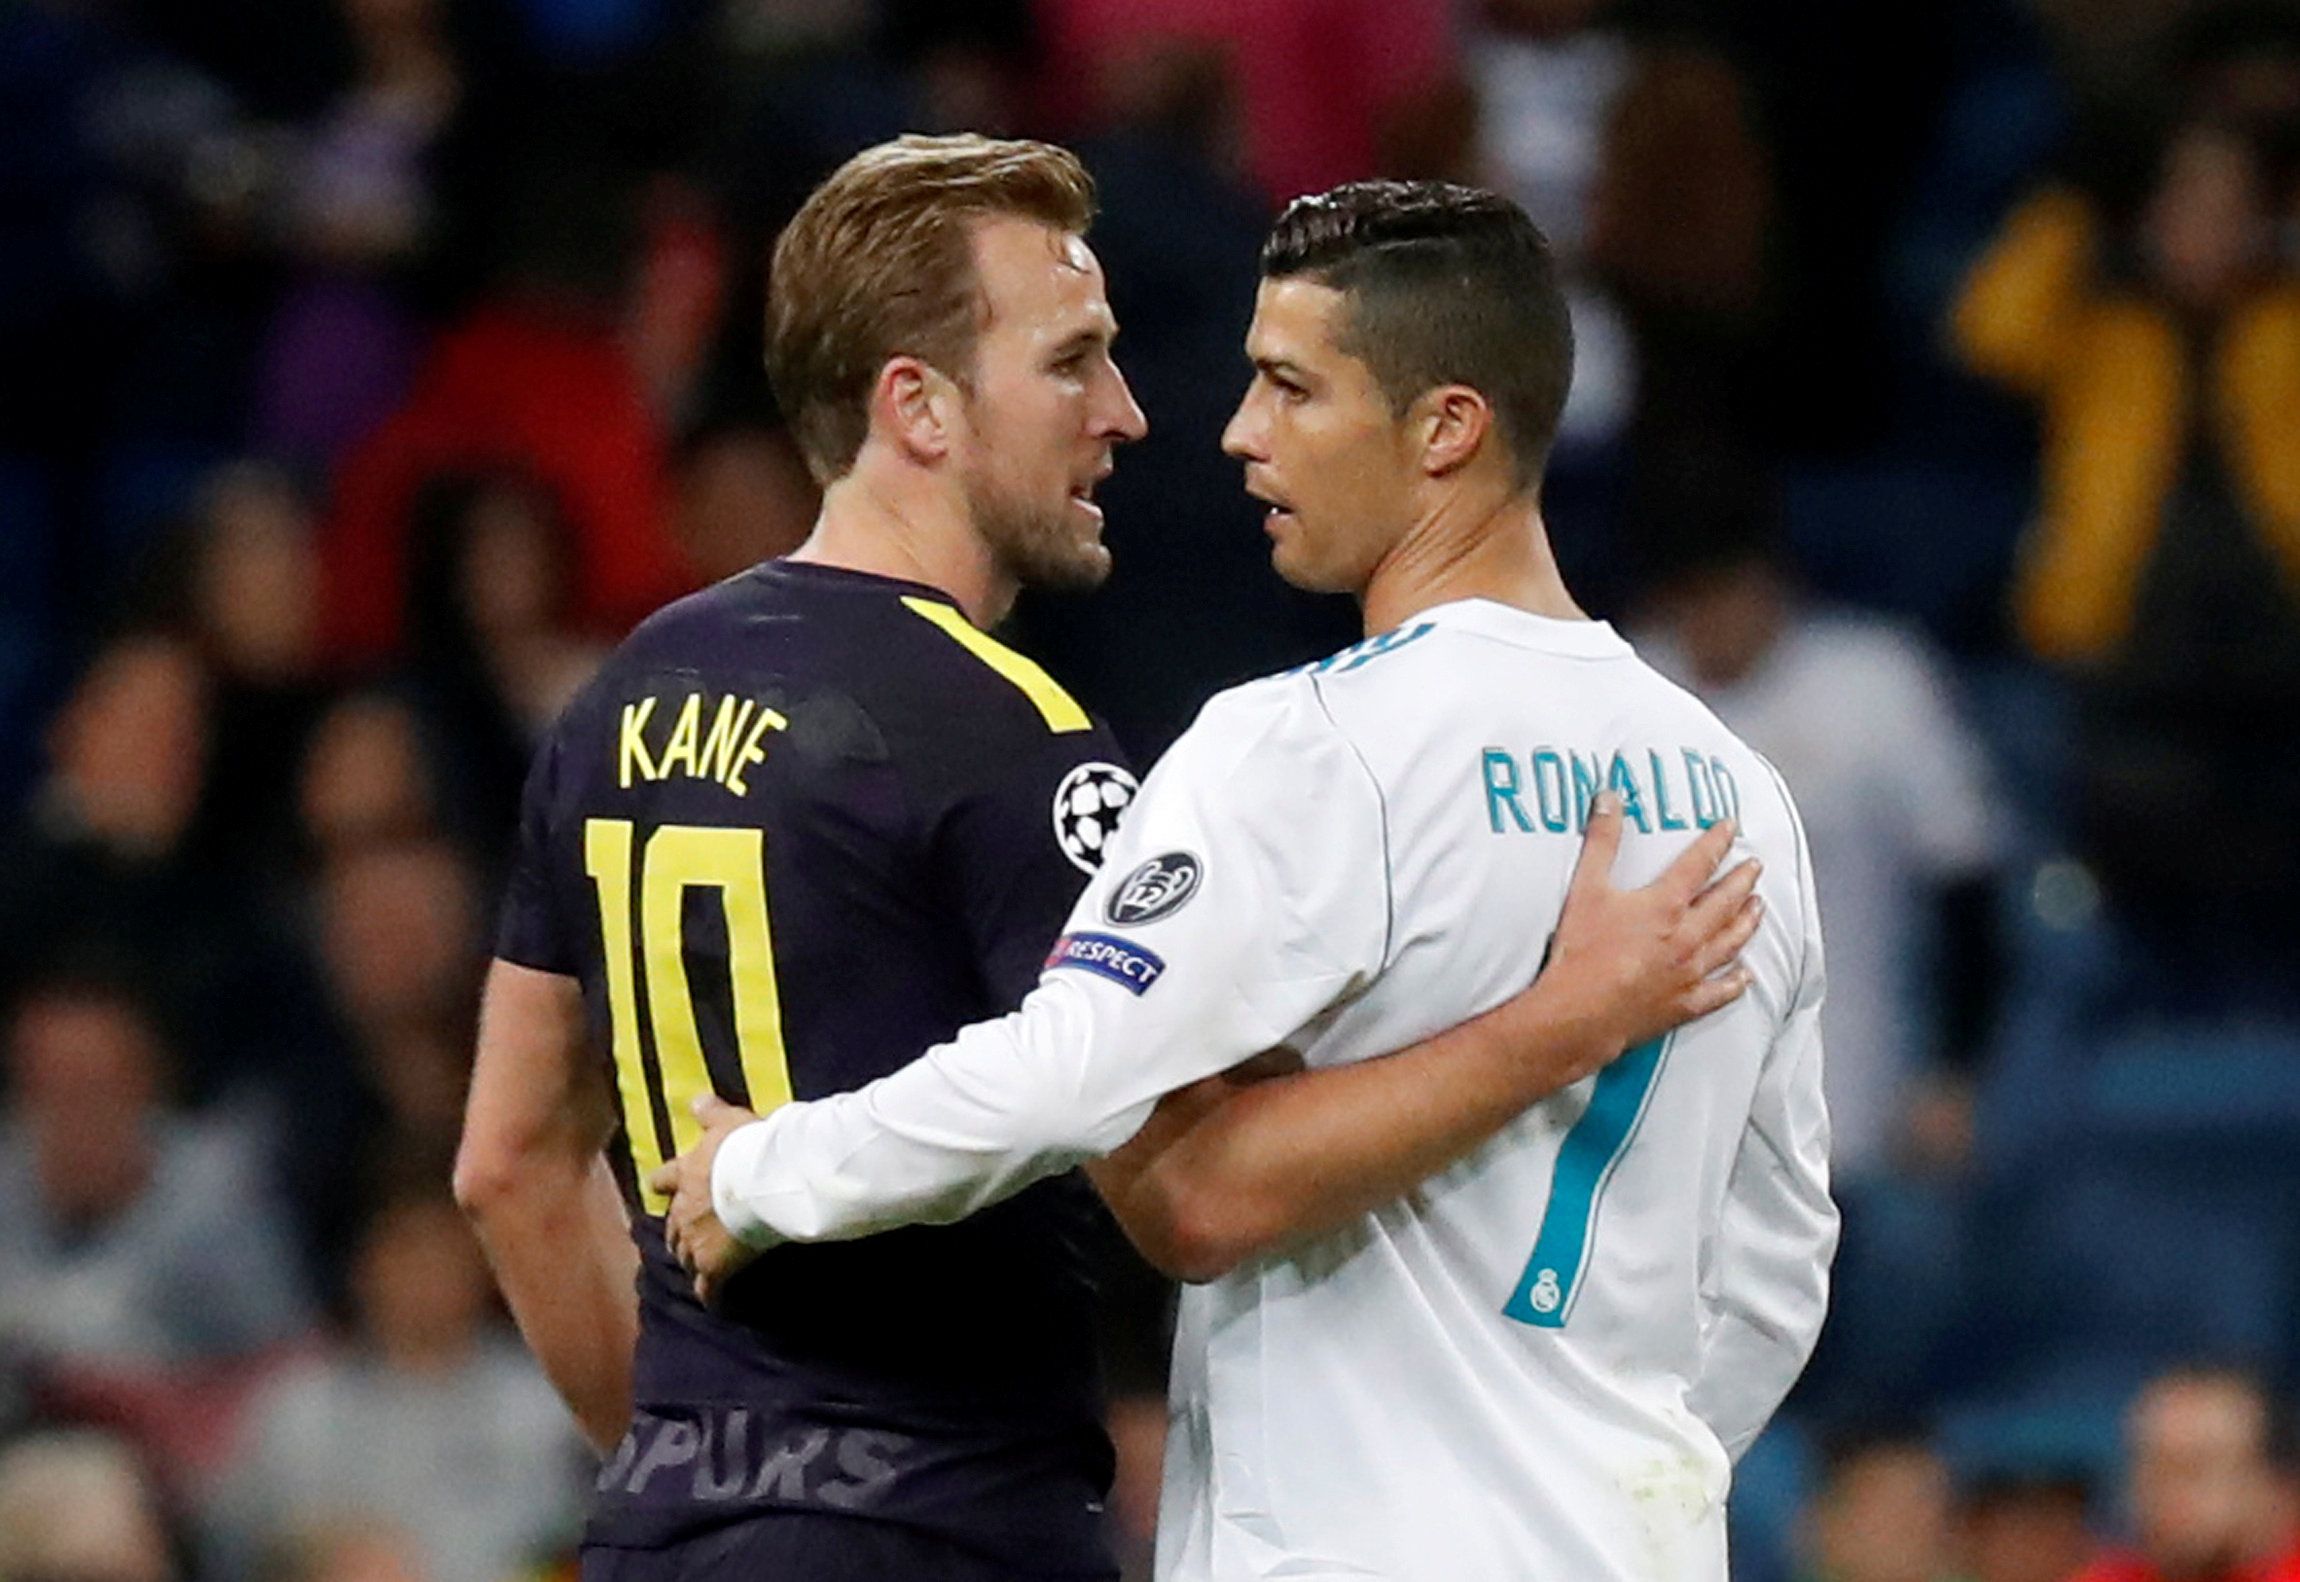 Soccer Football - Champions League - Real Madrid vs Tottenham Hotspur - Santiago Bernabeu Stadium, Madrid, Spain - October 17, 2017   Real Madrid’s Cristiano Ronaldo with Tottenham's Harry Kane after the match   REUTERS/Paul Hanna     TPX IMAGES OF THE DAY